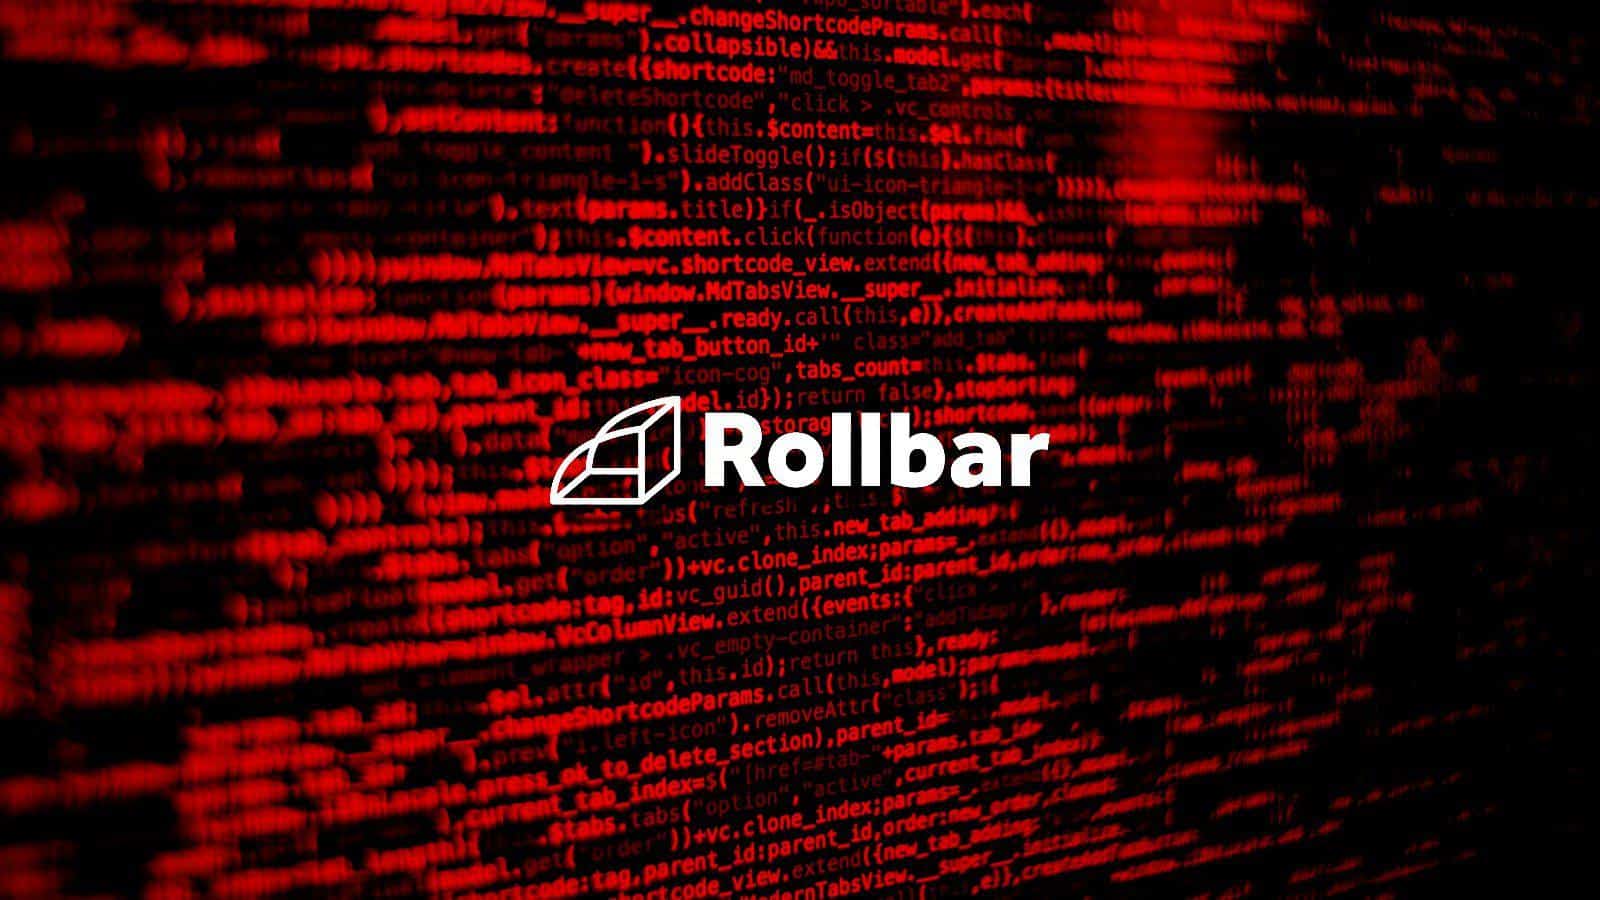 Rollbar discloses data breach after hackers stole access tokens